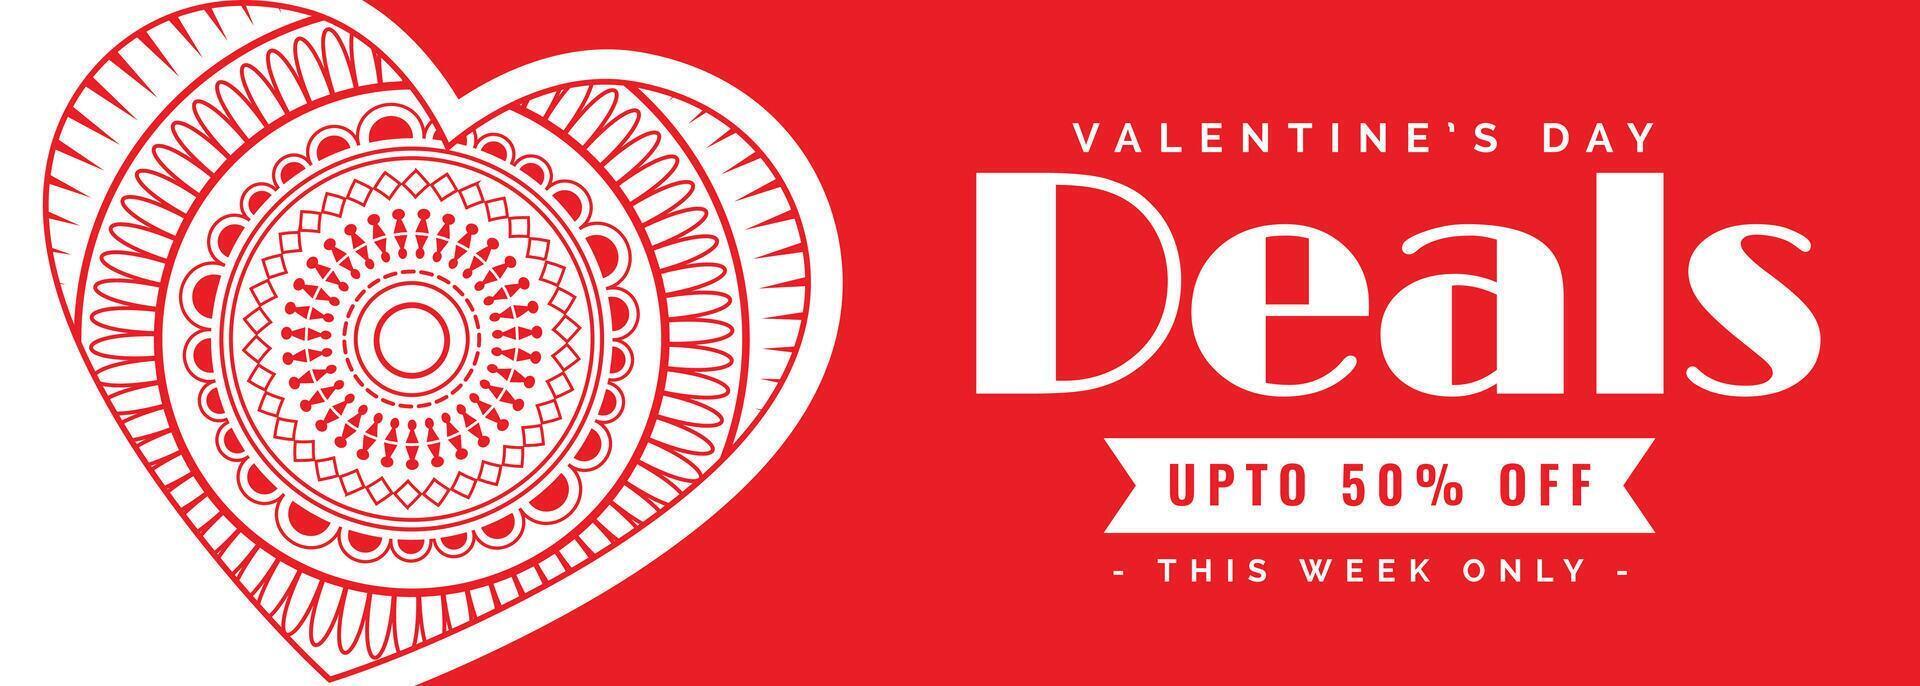 valentines day deals and offer decorative banner design vector